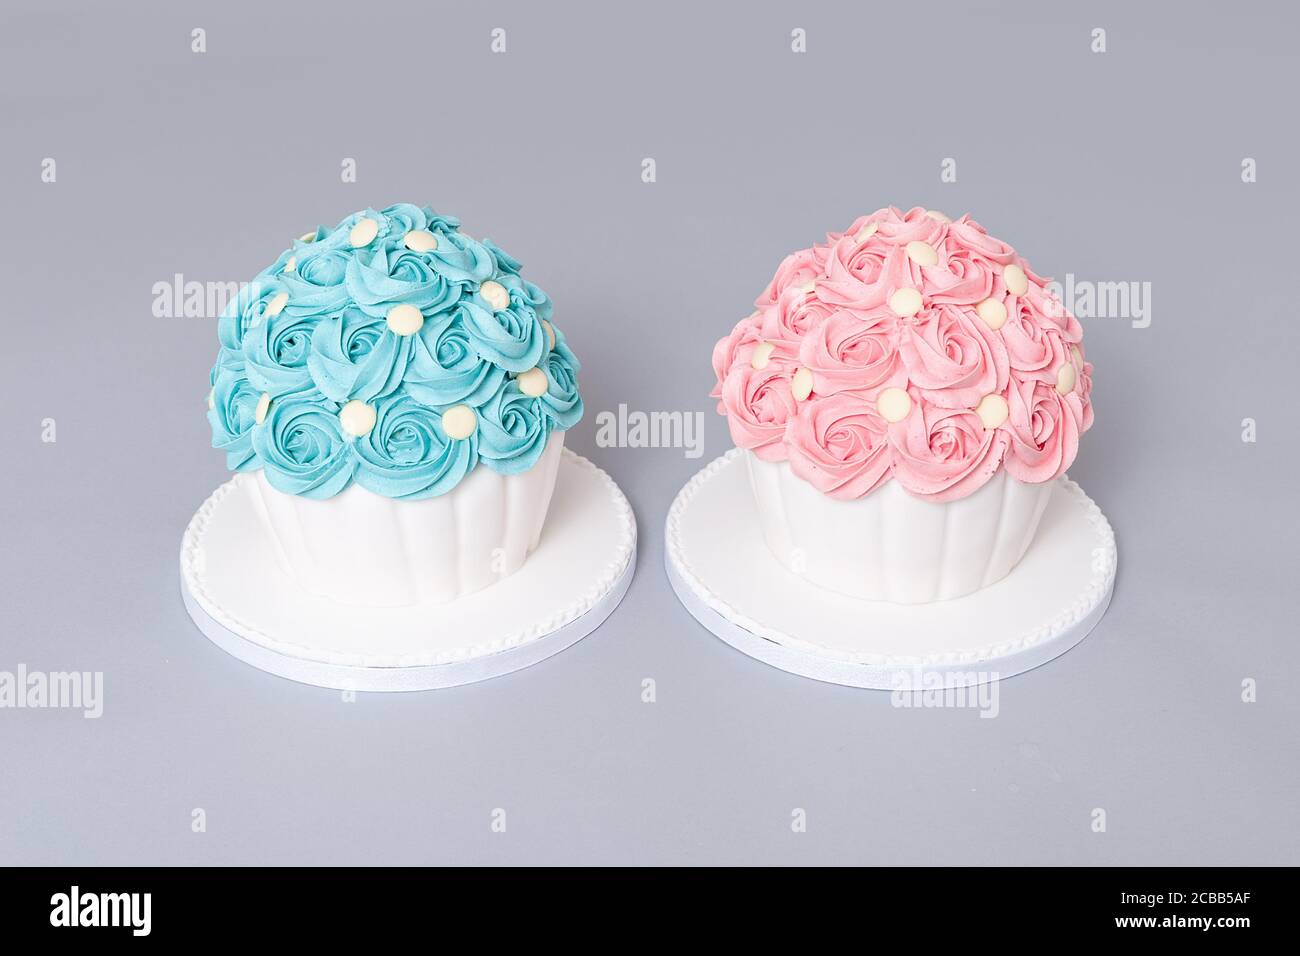 Birthday Cakes Twins Boy Girl High Resolution Stock Photography And Images Alamy